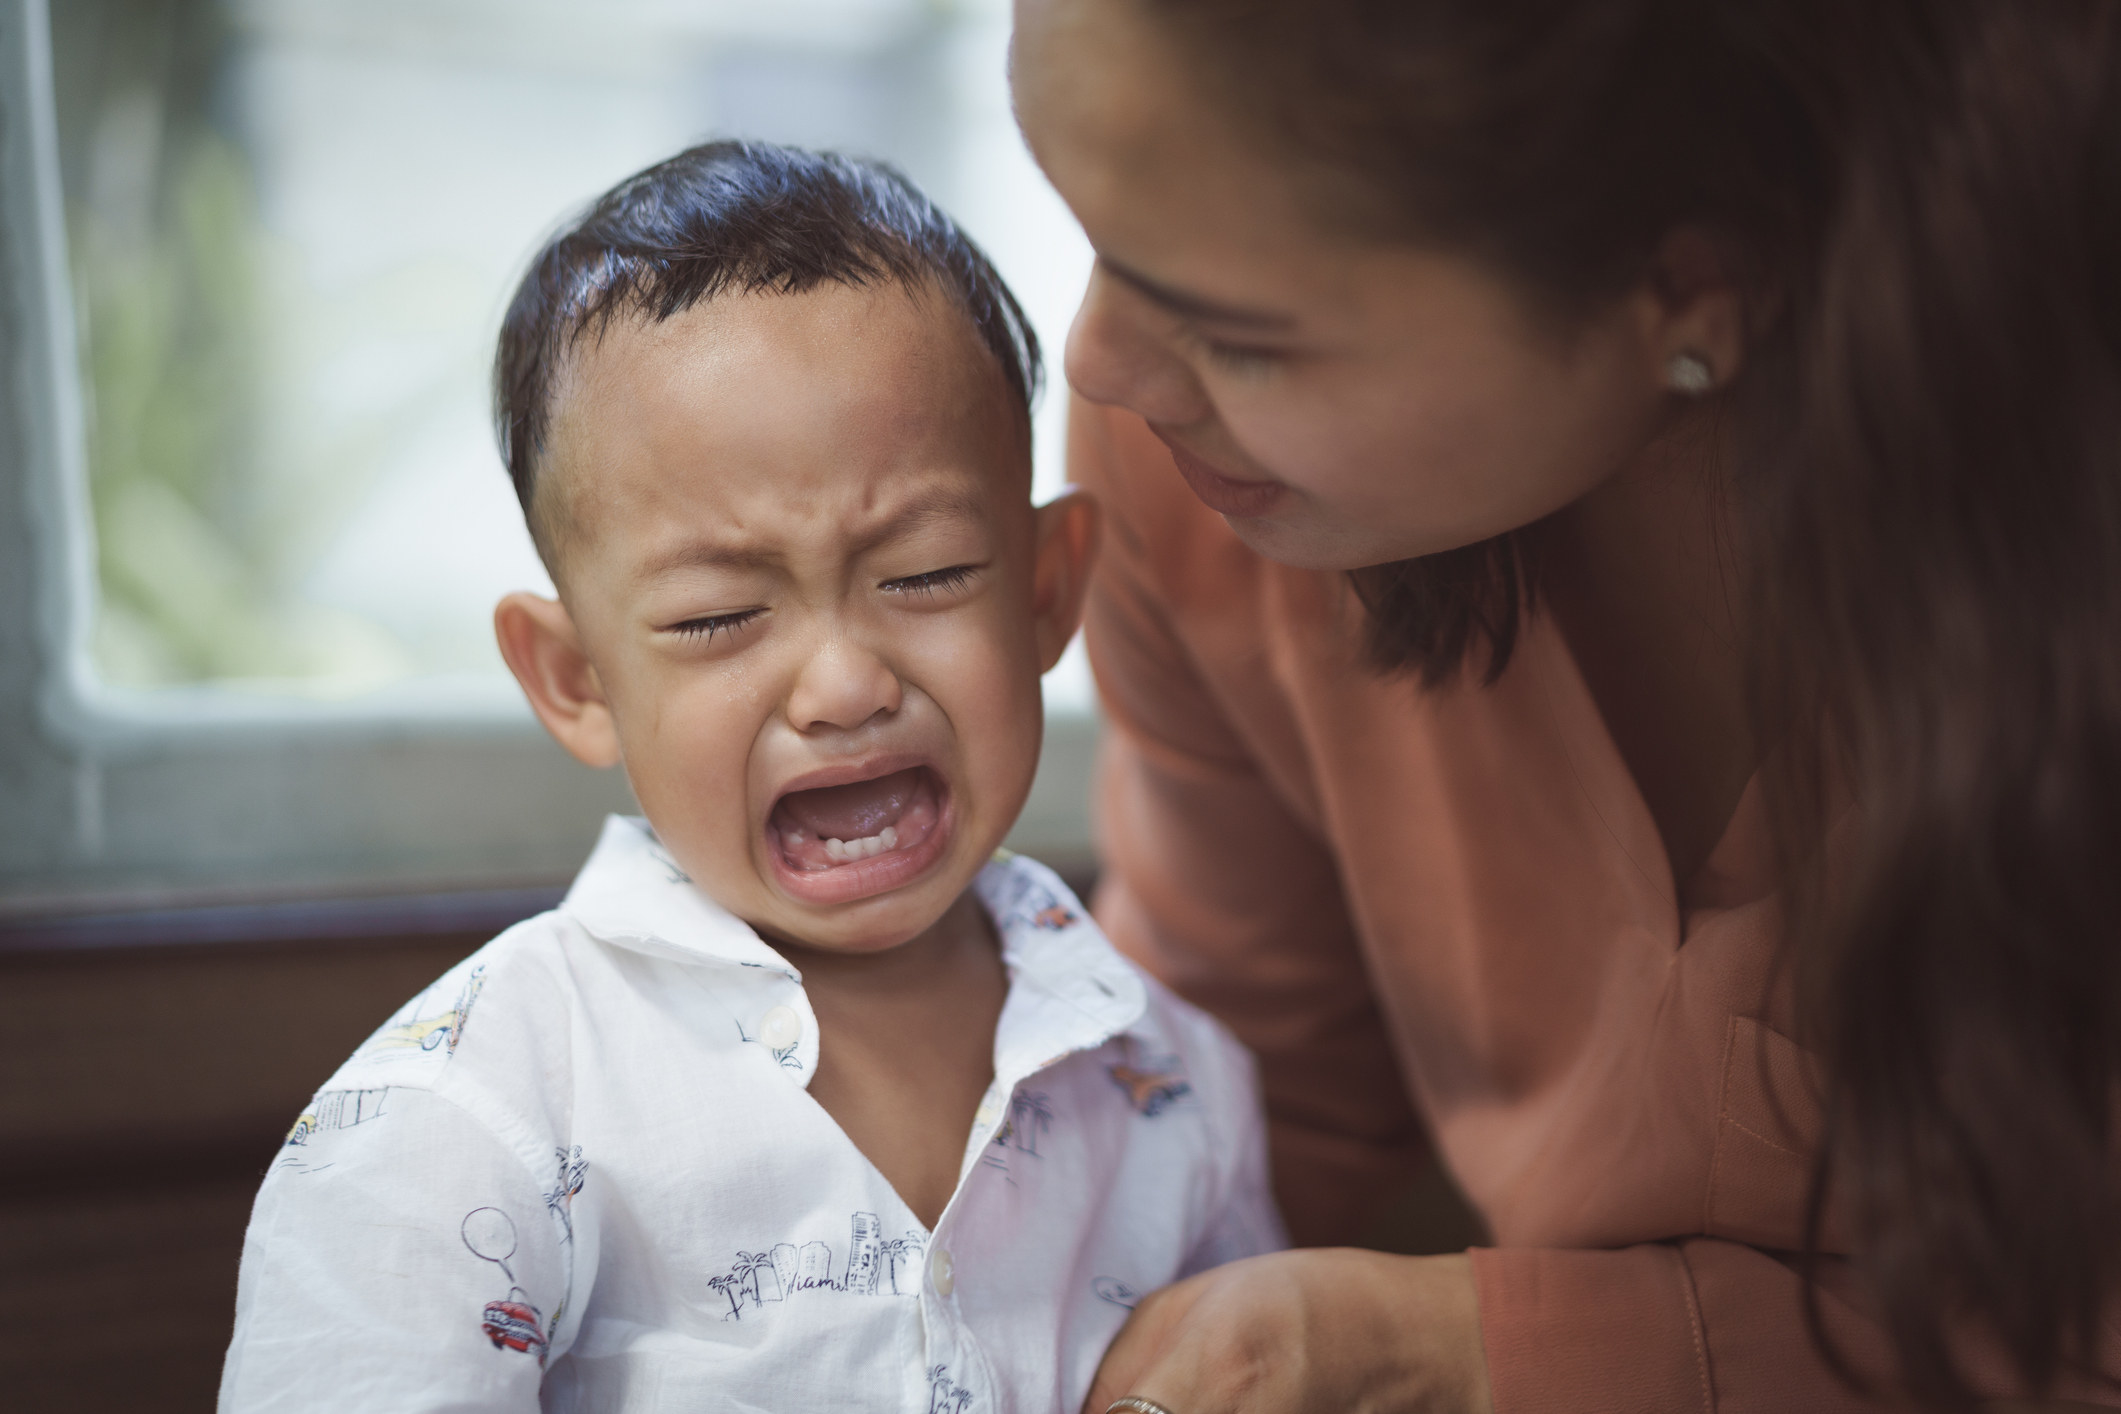 A woman with a crying child